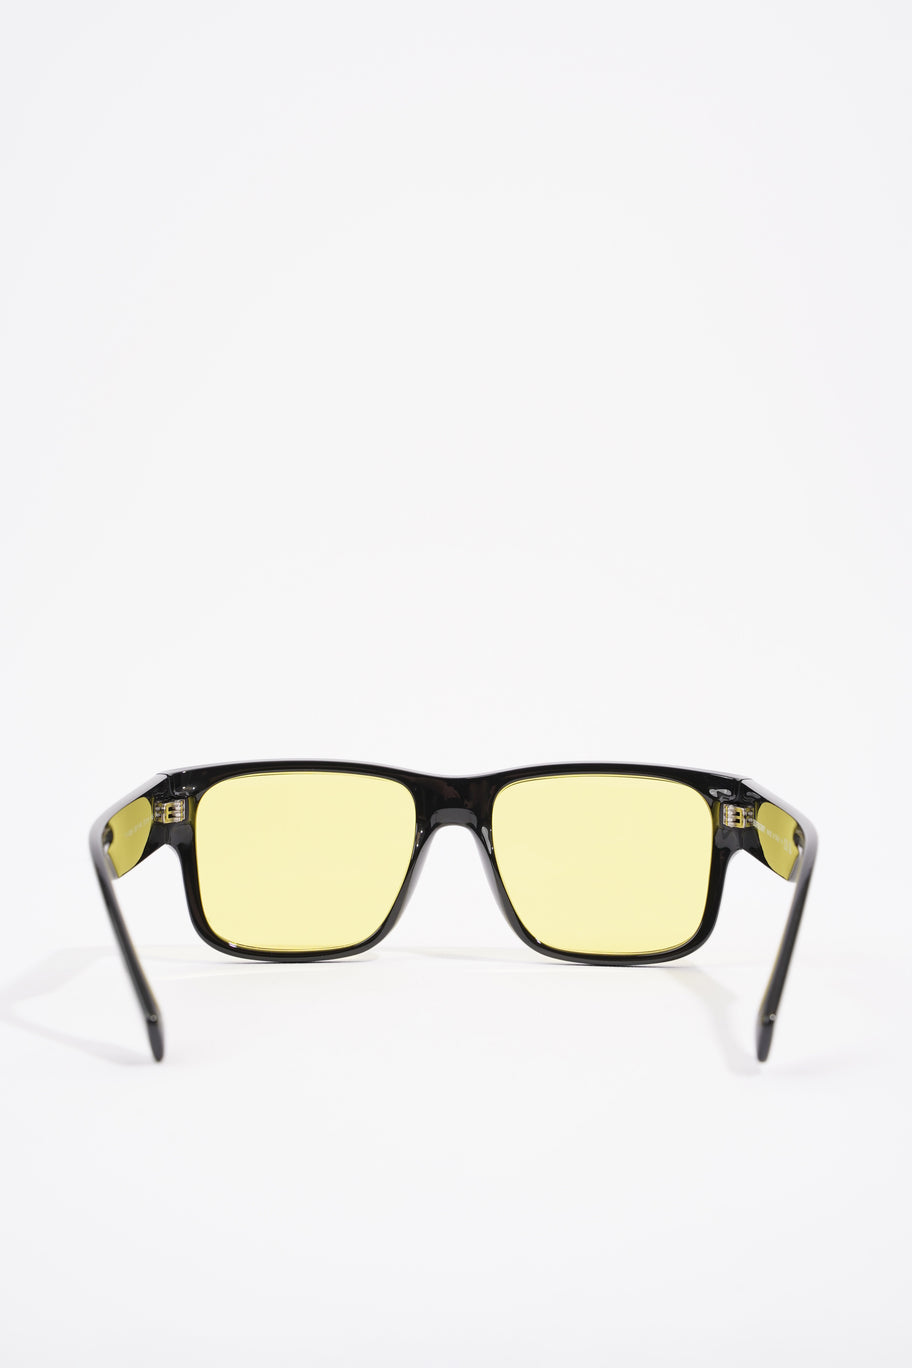 Knight Square Tinted Sunglasses Black / Yellow Acetate 145mm Image 4